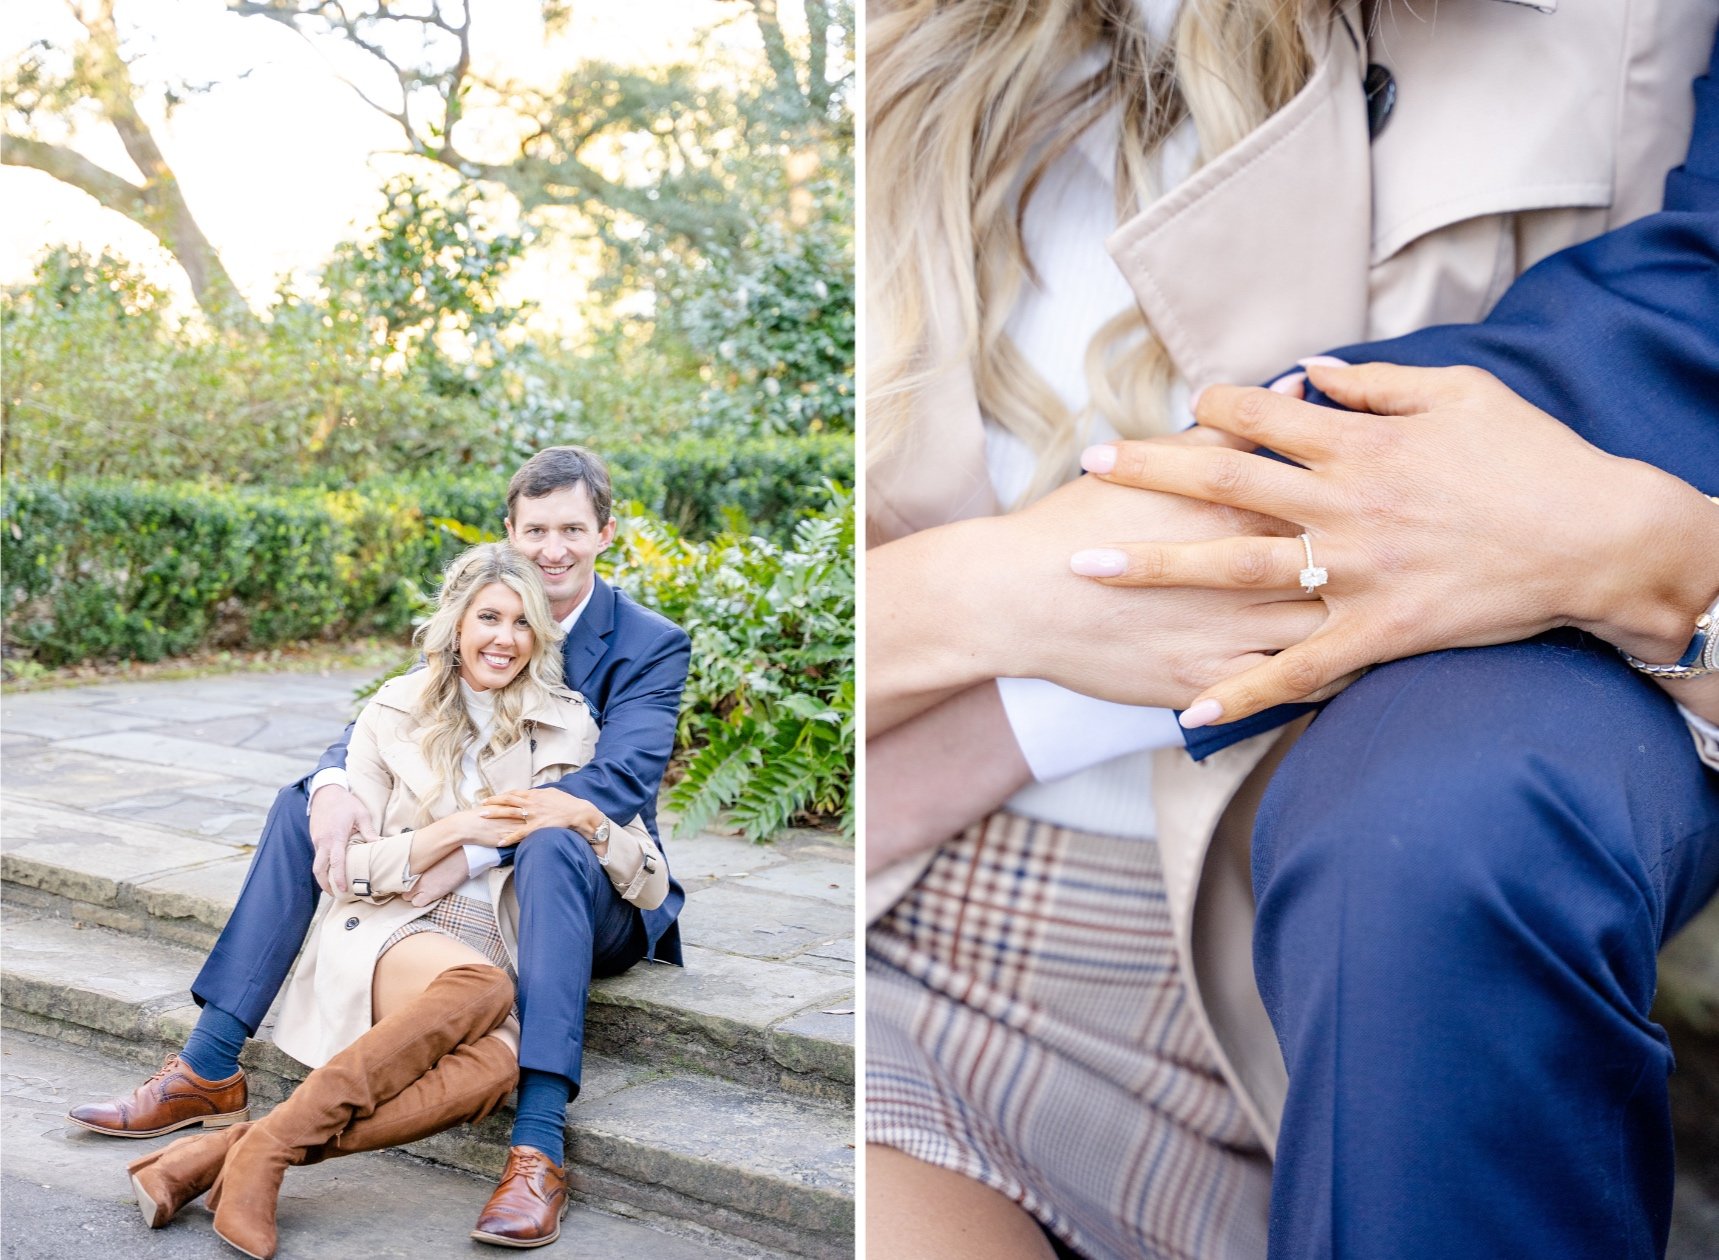 Bellingrath Gardens Engagement Session in January Photographed by Kristen Marcus Photography